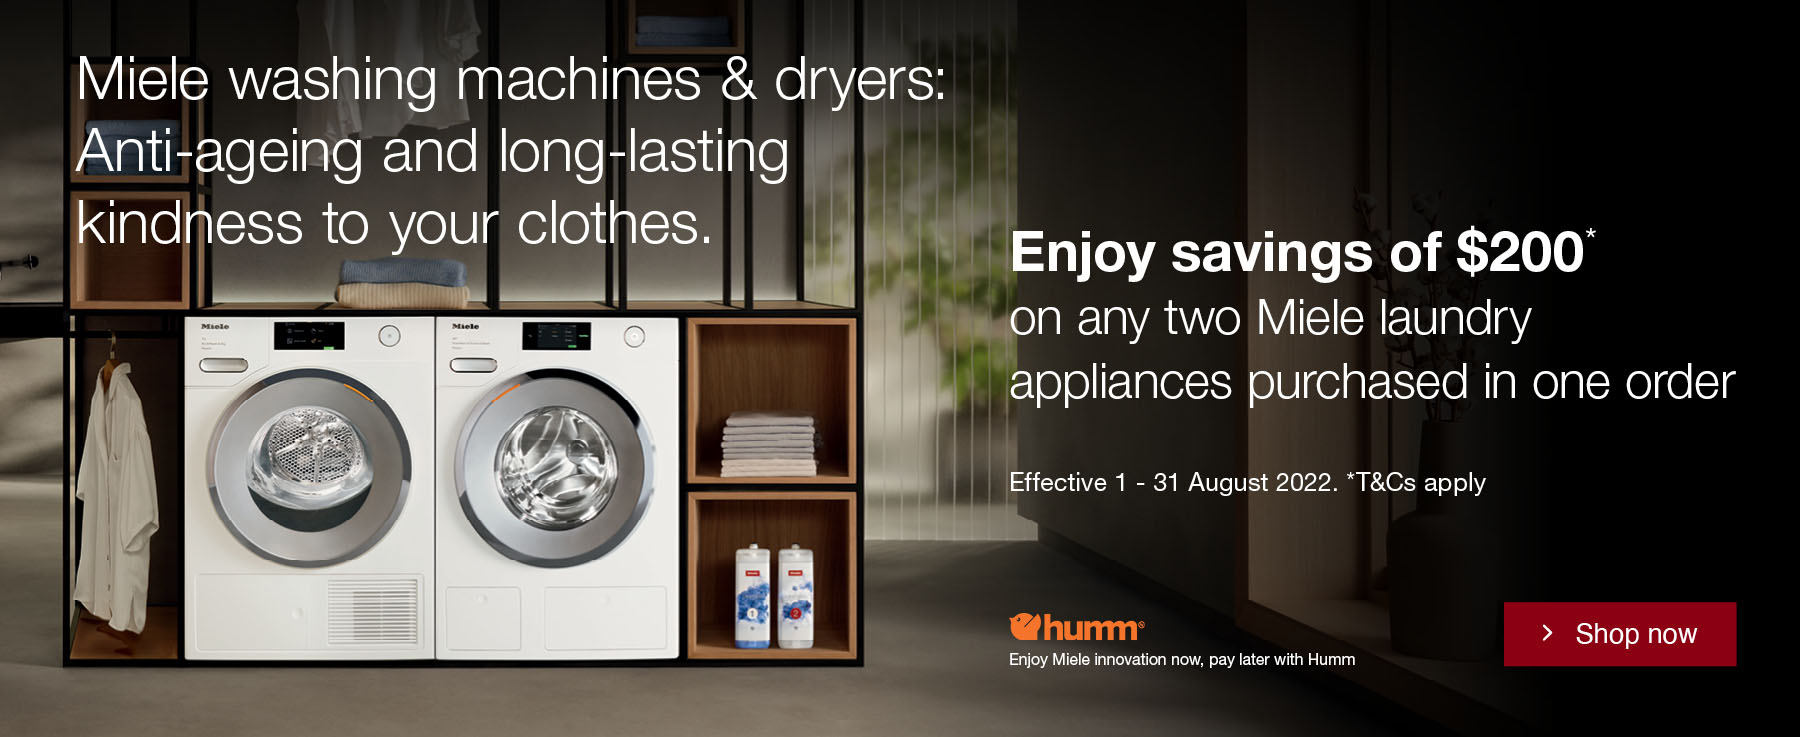 Enjoy $200 saving on any two Miele laundry appliances purchased in one order